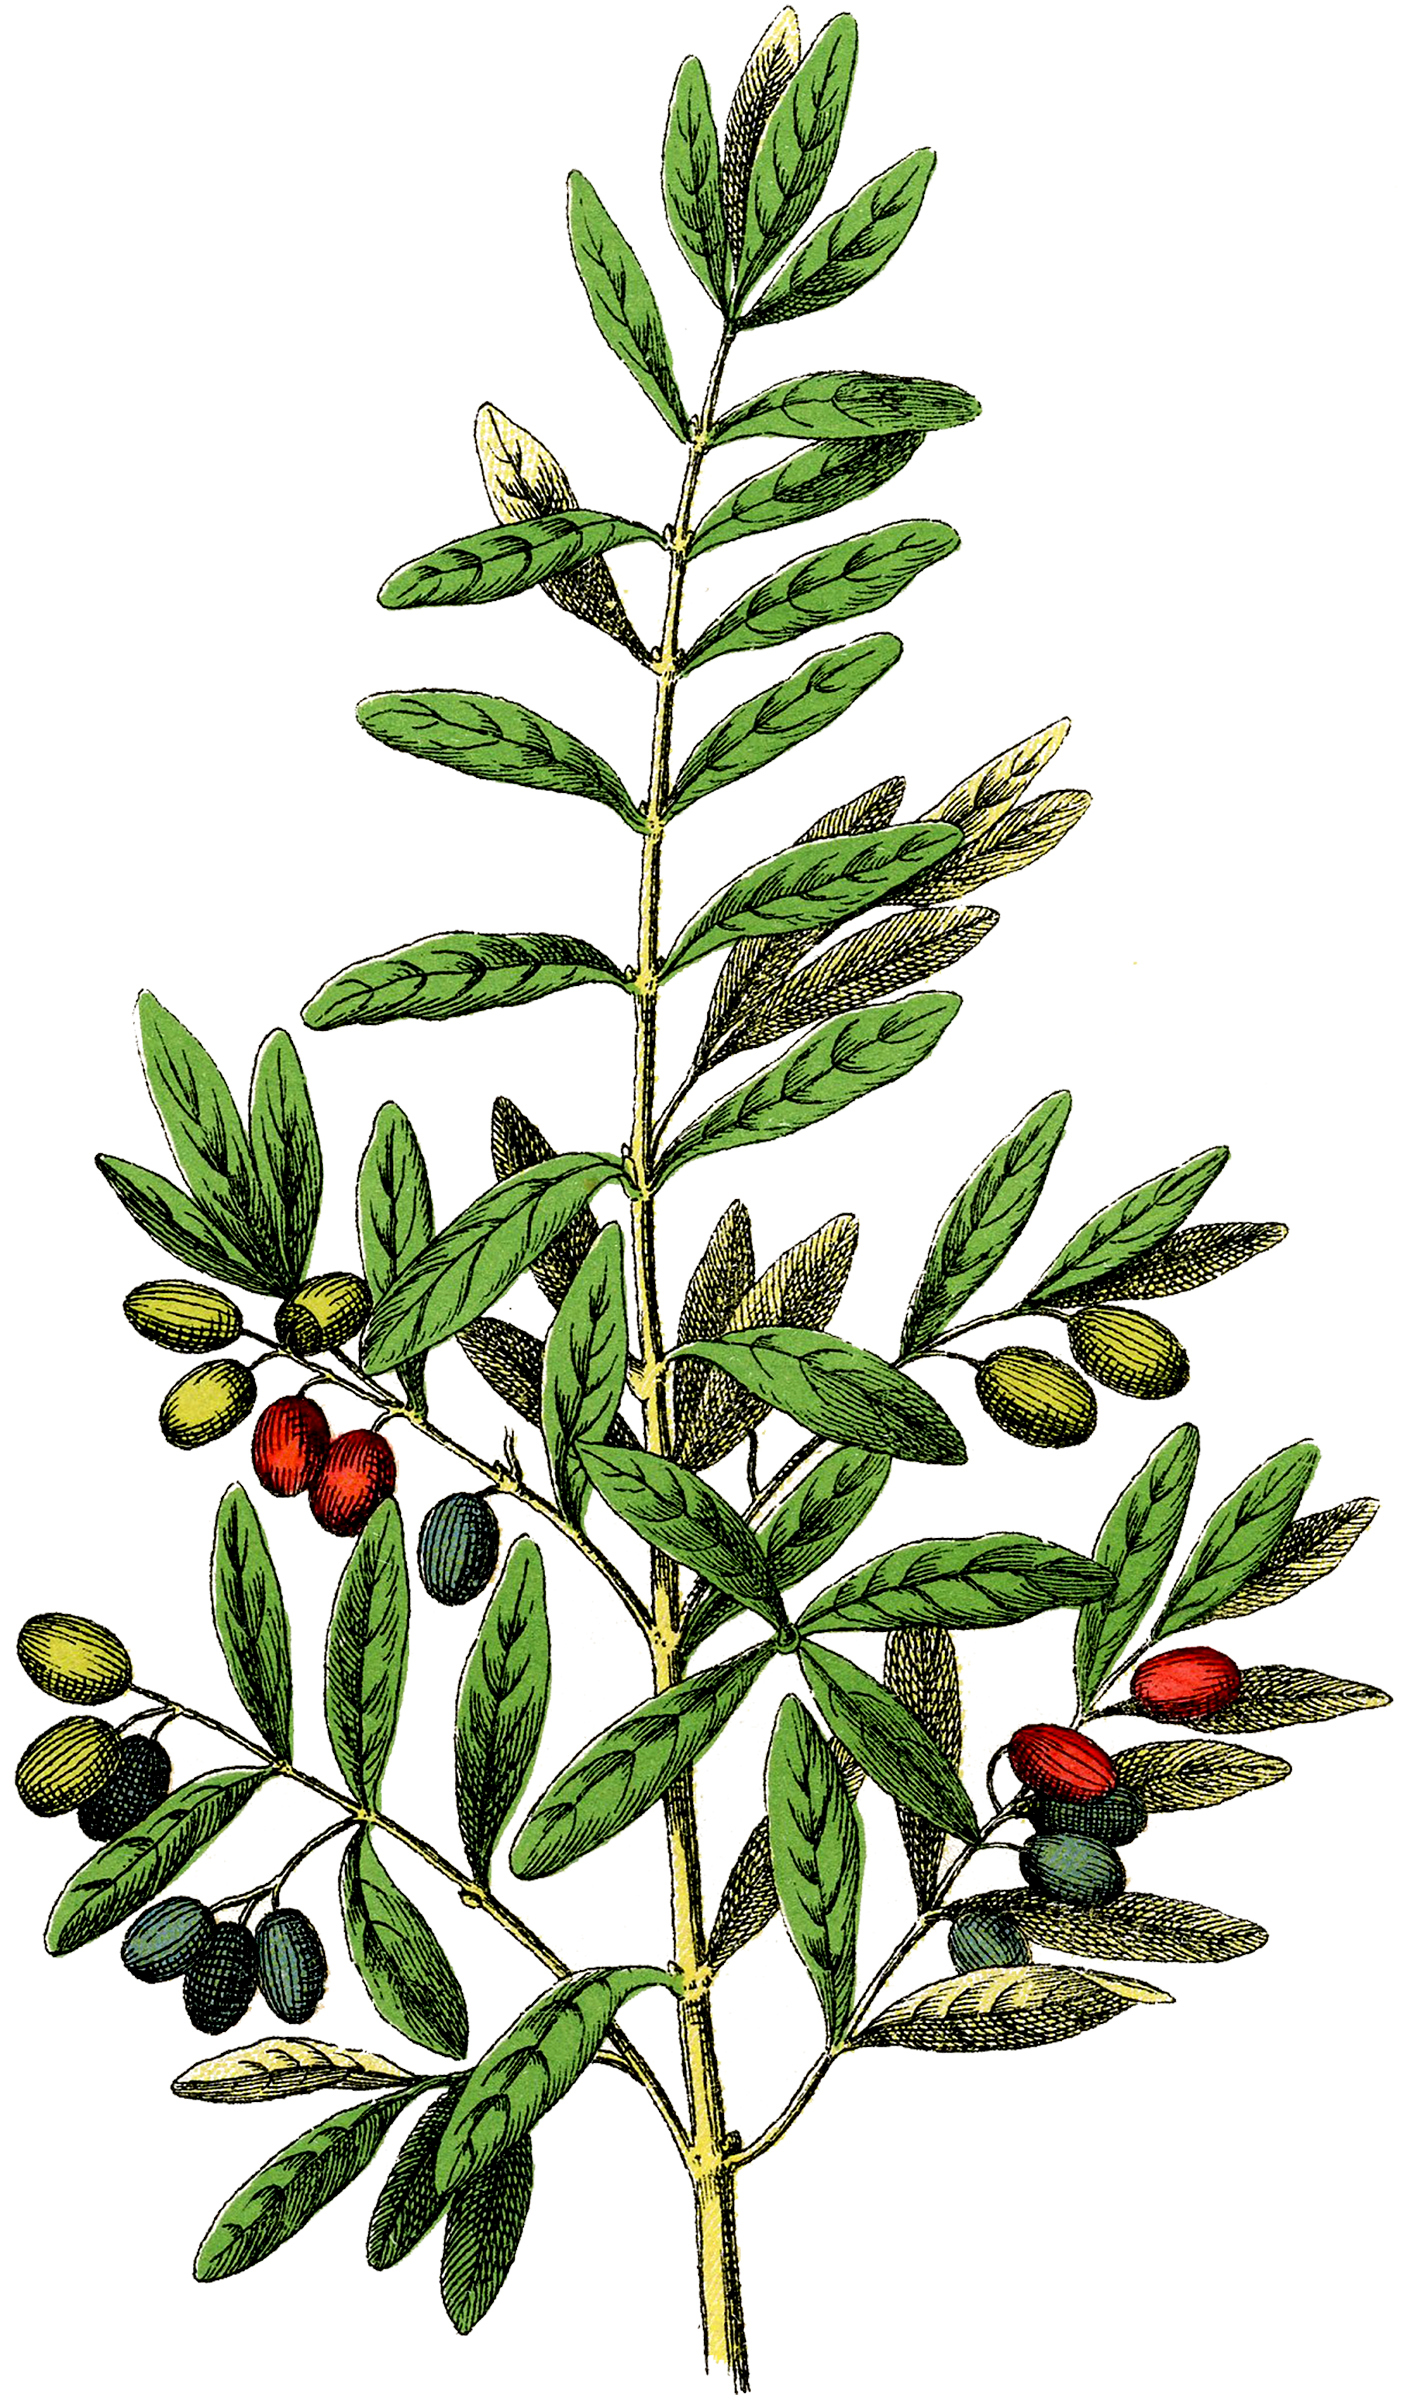 Free Botanical Olives Clip Art - Gorgeous! - The Graphics Fairy